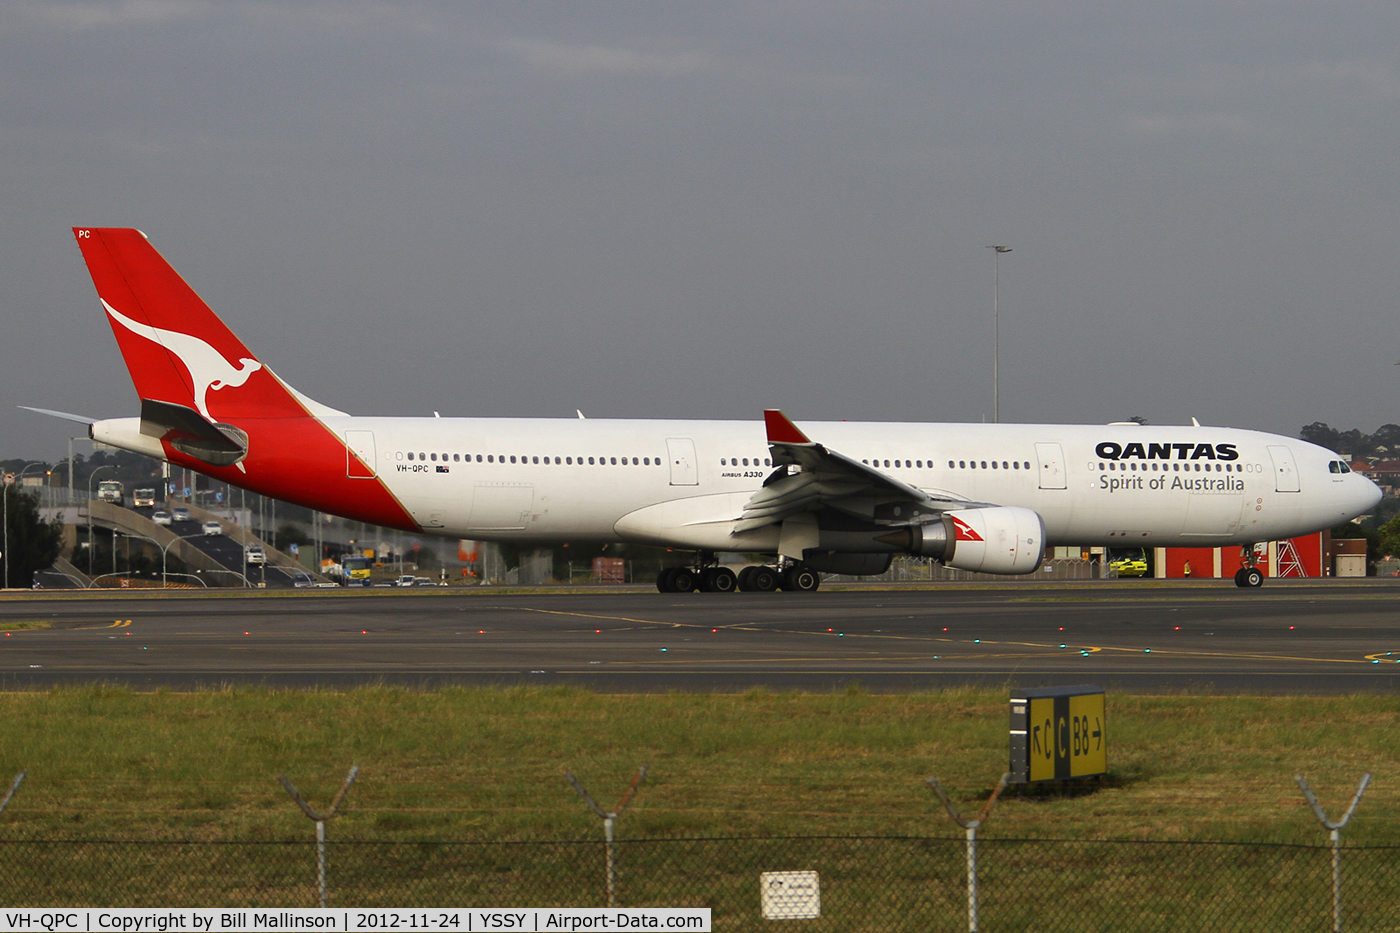 VH-QPC, 2003 Airbus A330-303 C/N 564, taxiing from 34L